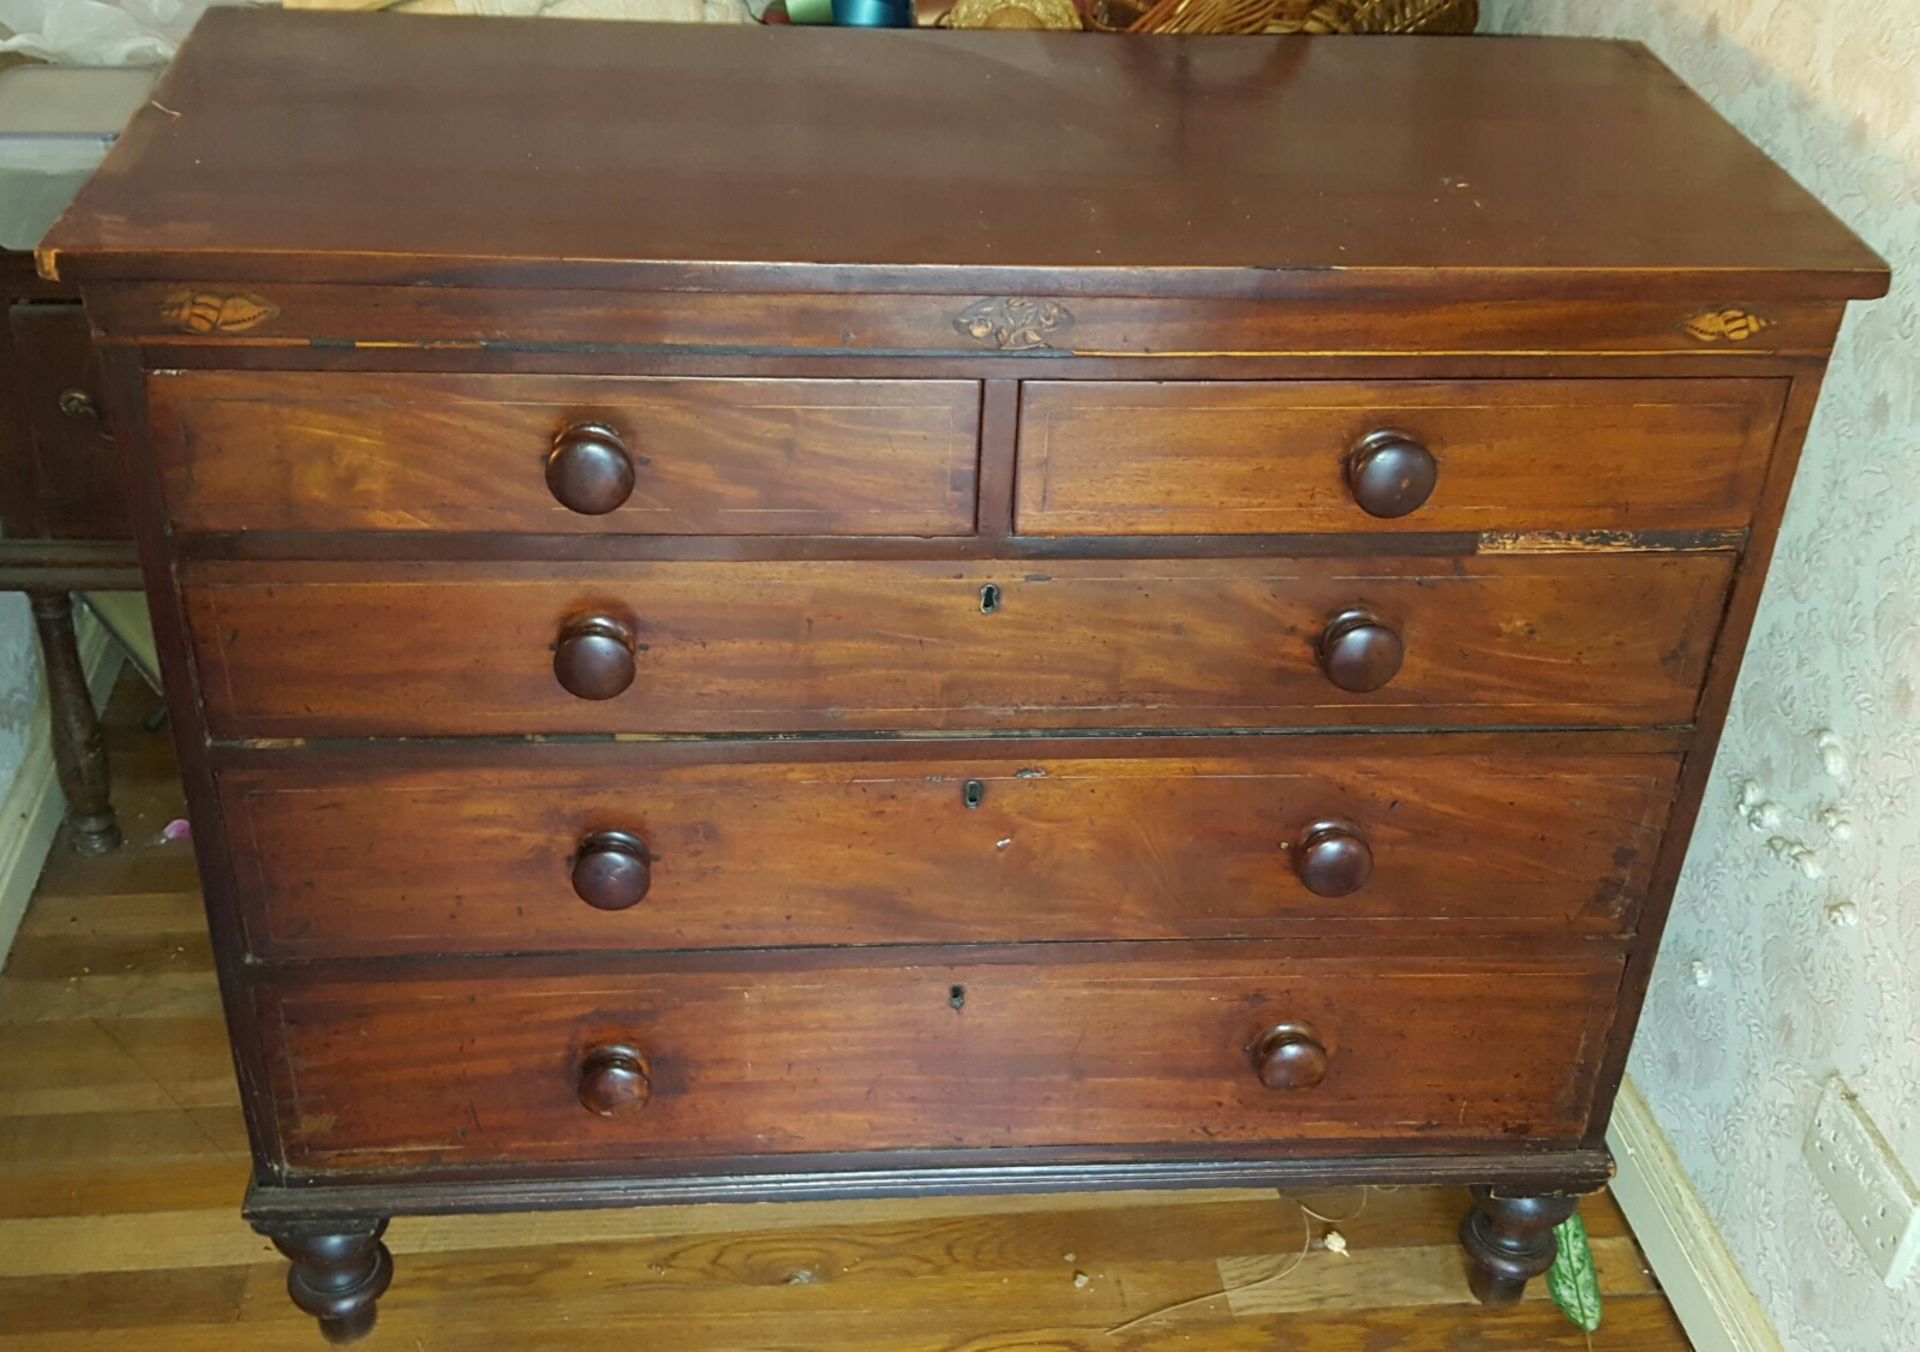 Victorian Set of Drawers